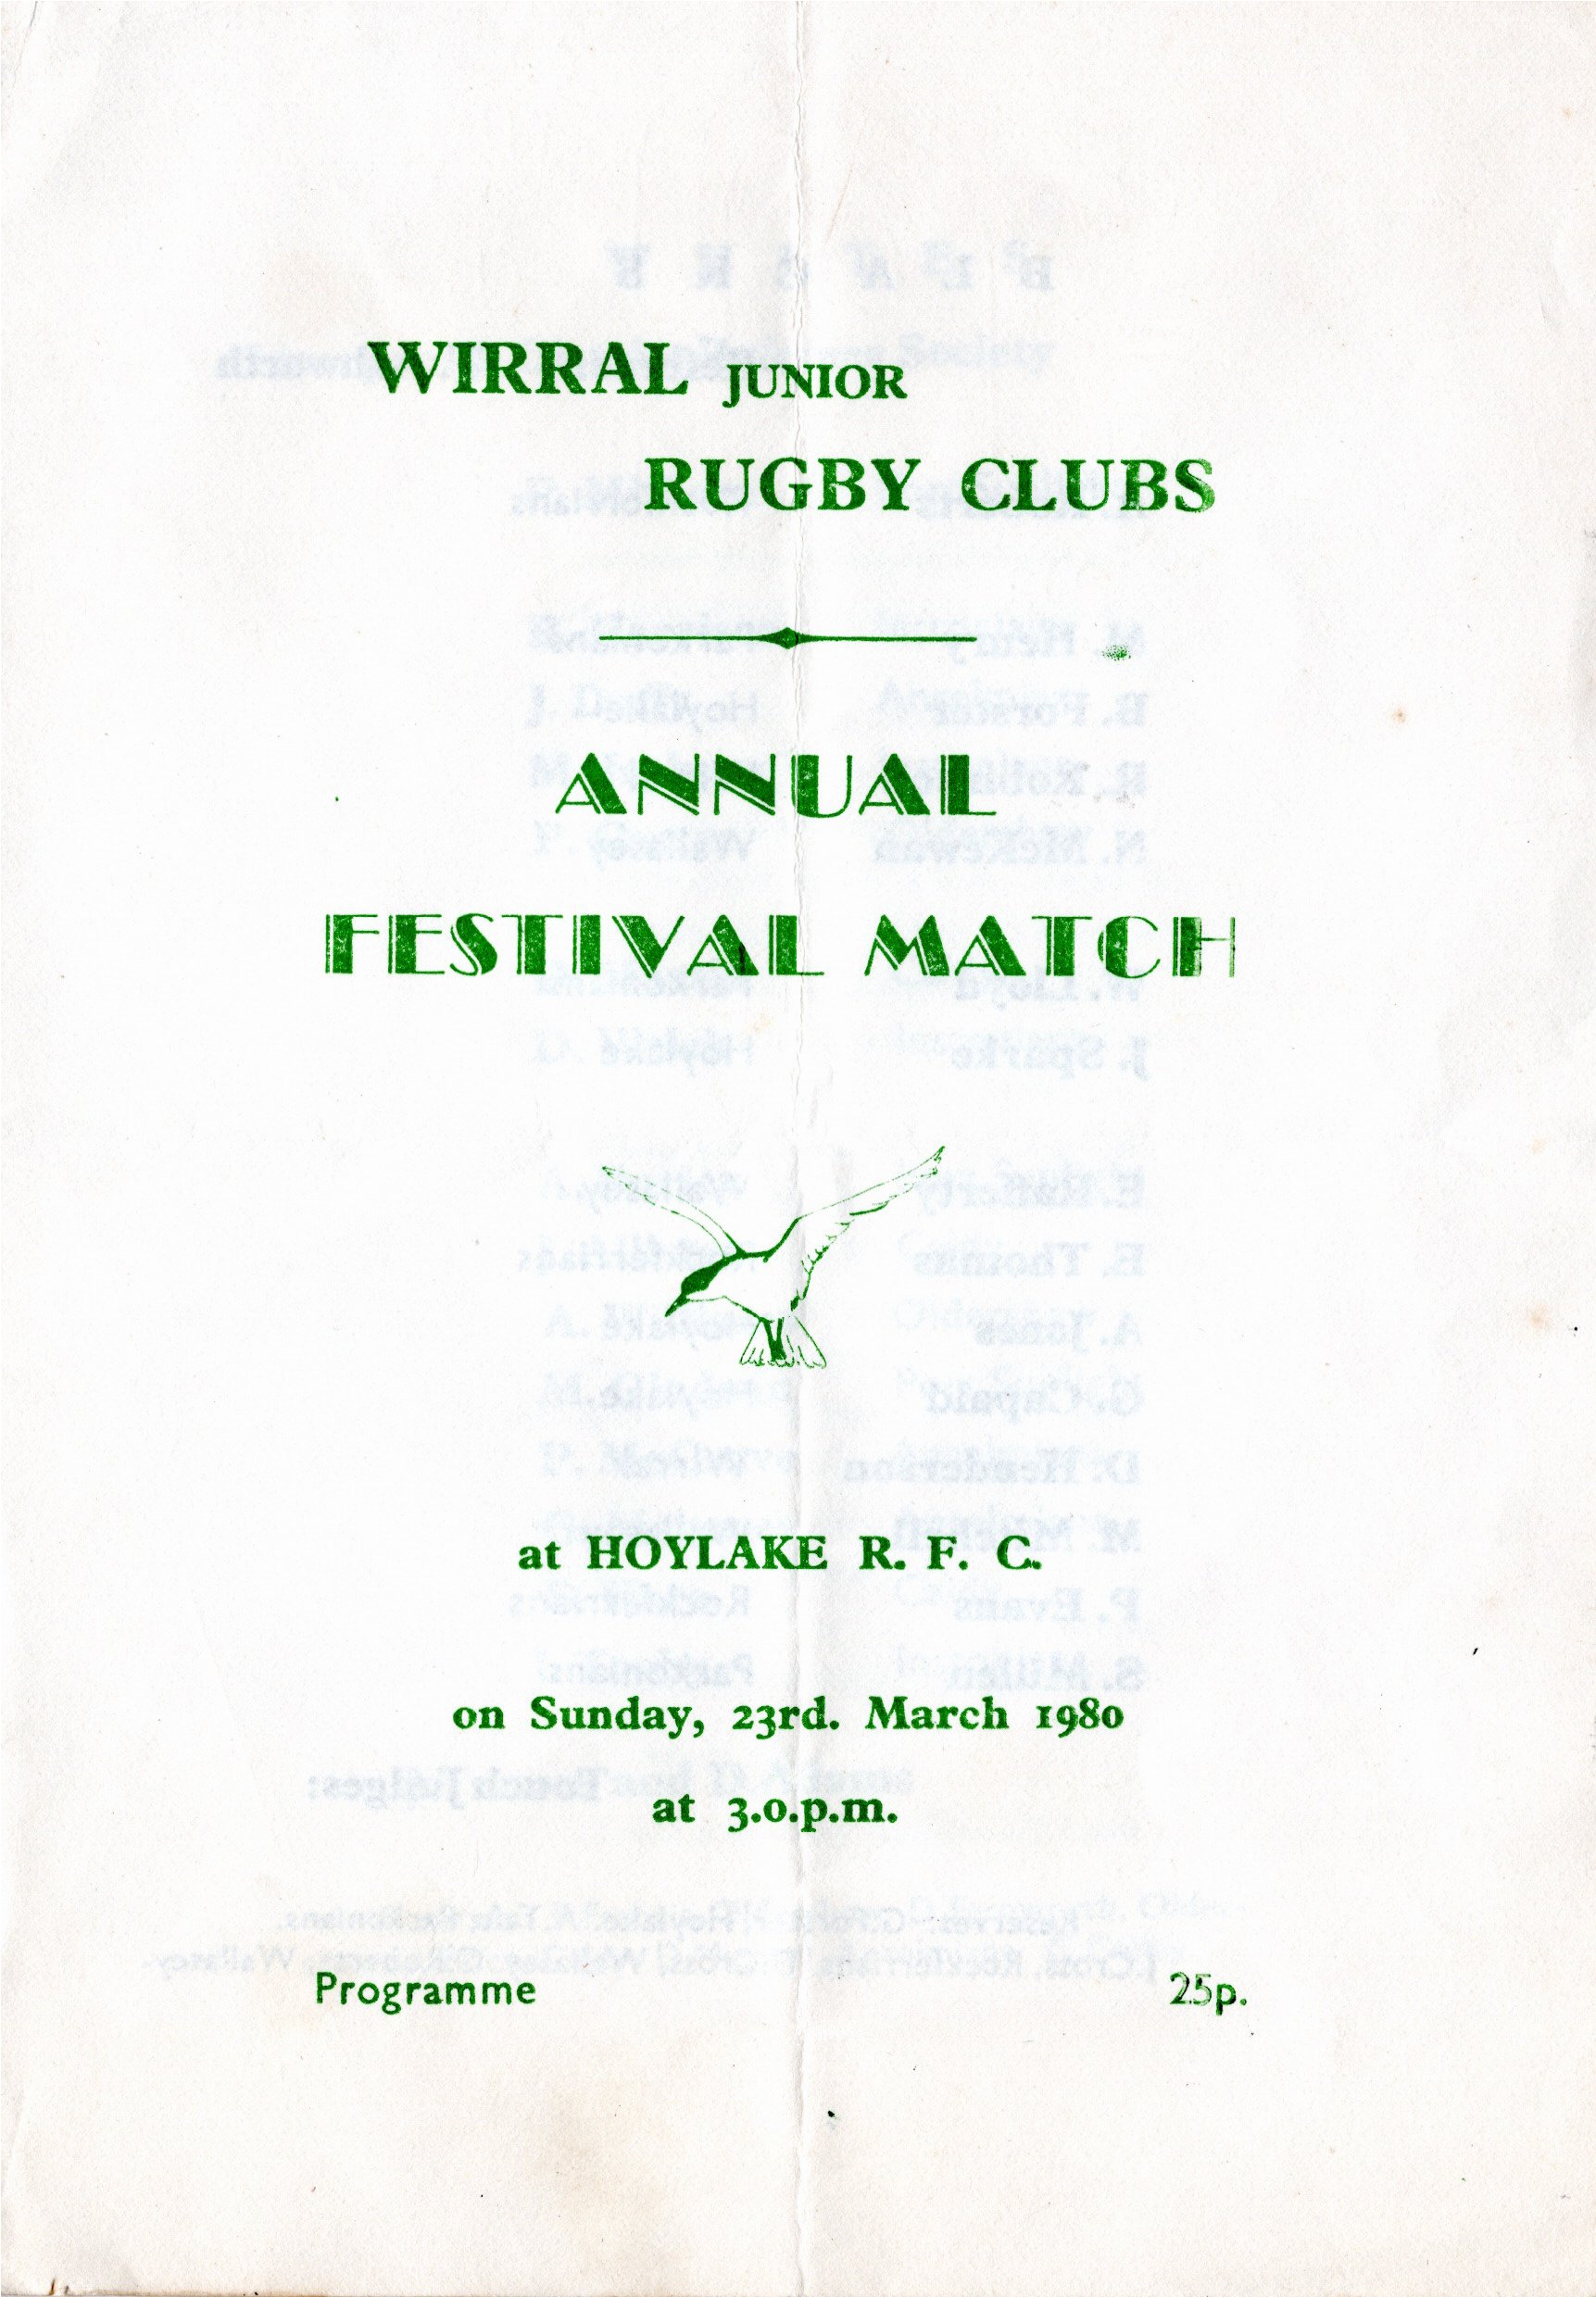 Old Instonians RUFC, Wirral Junior Rugby Clubs, Annual Festival Match